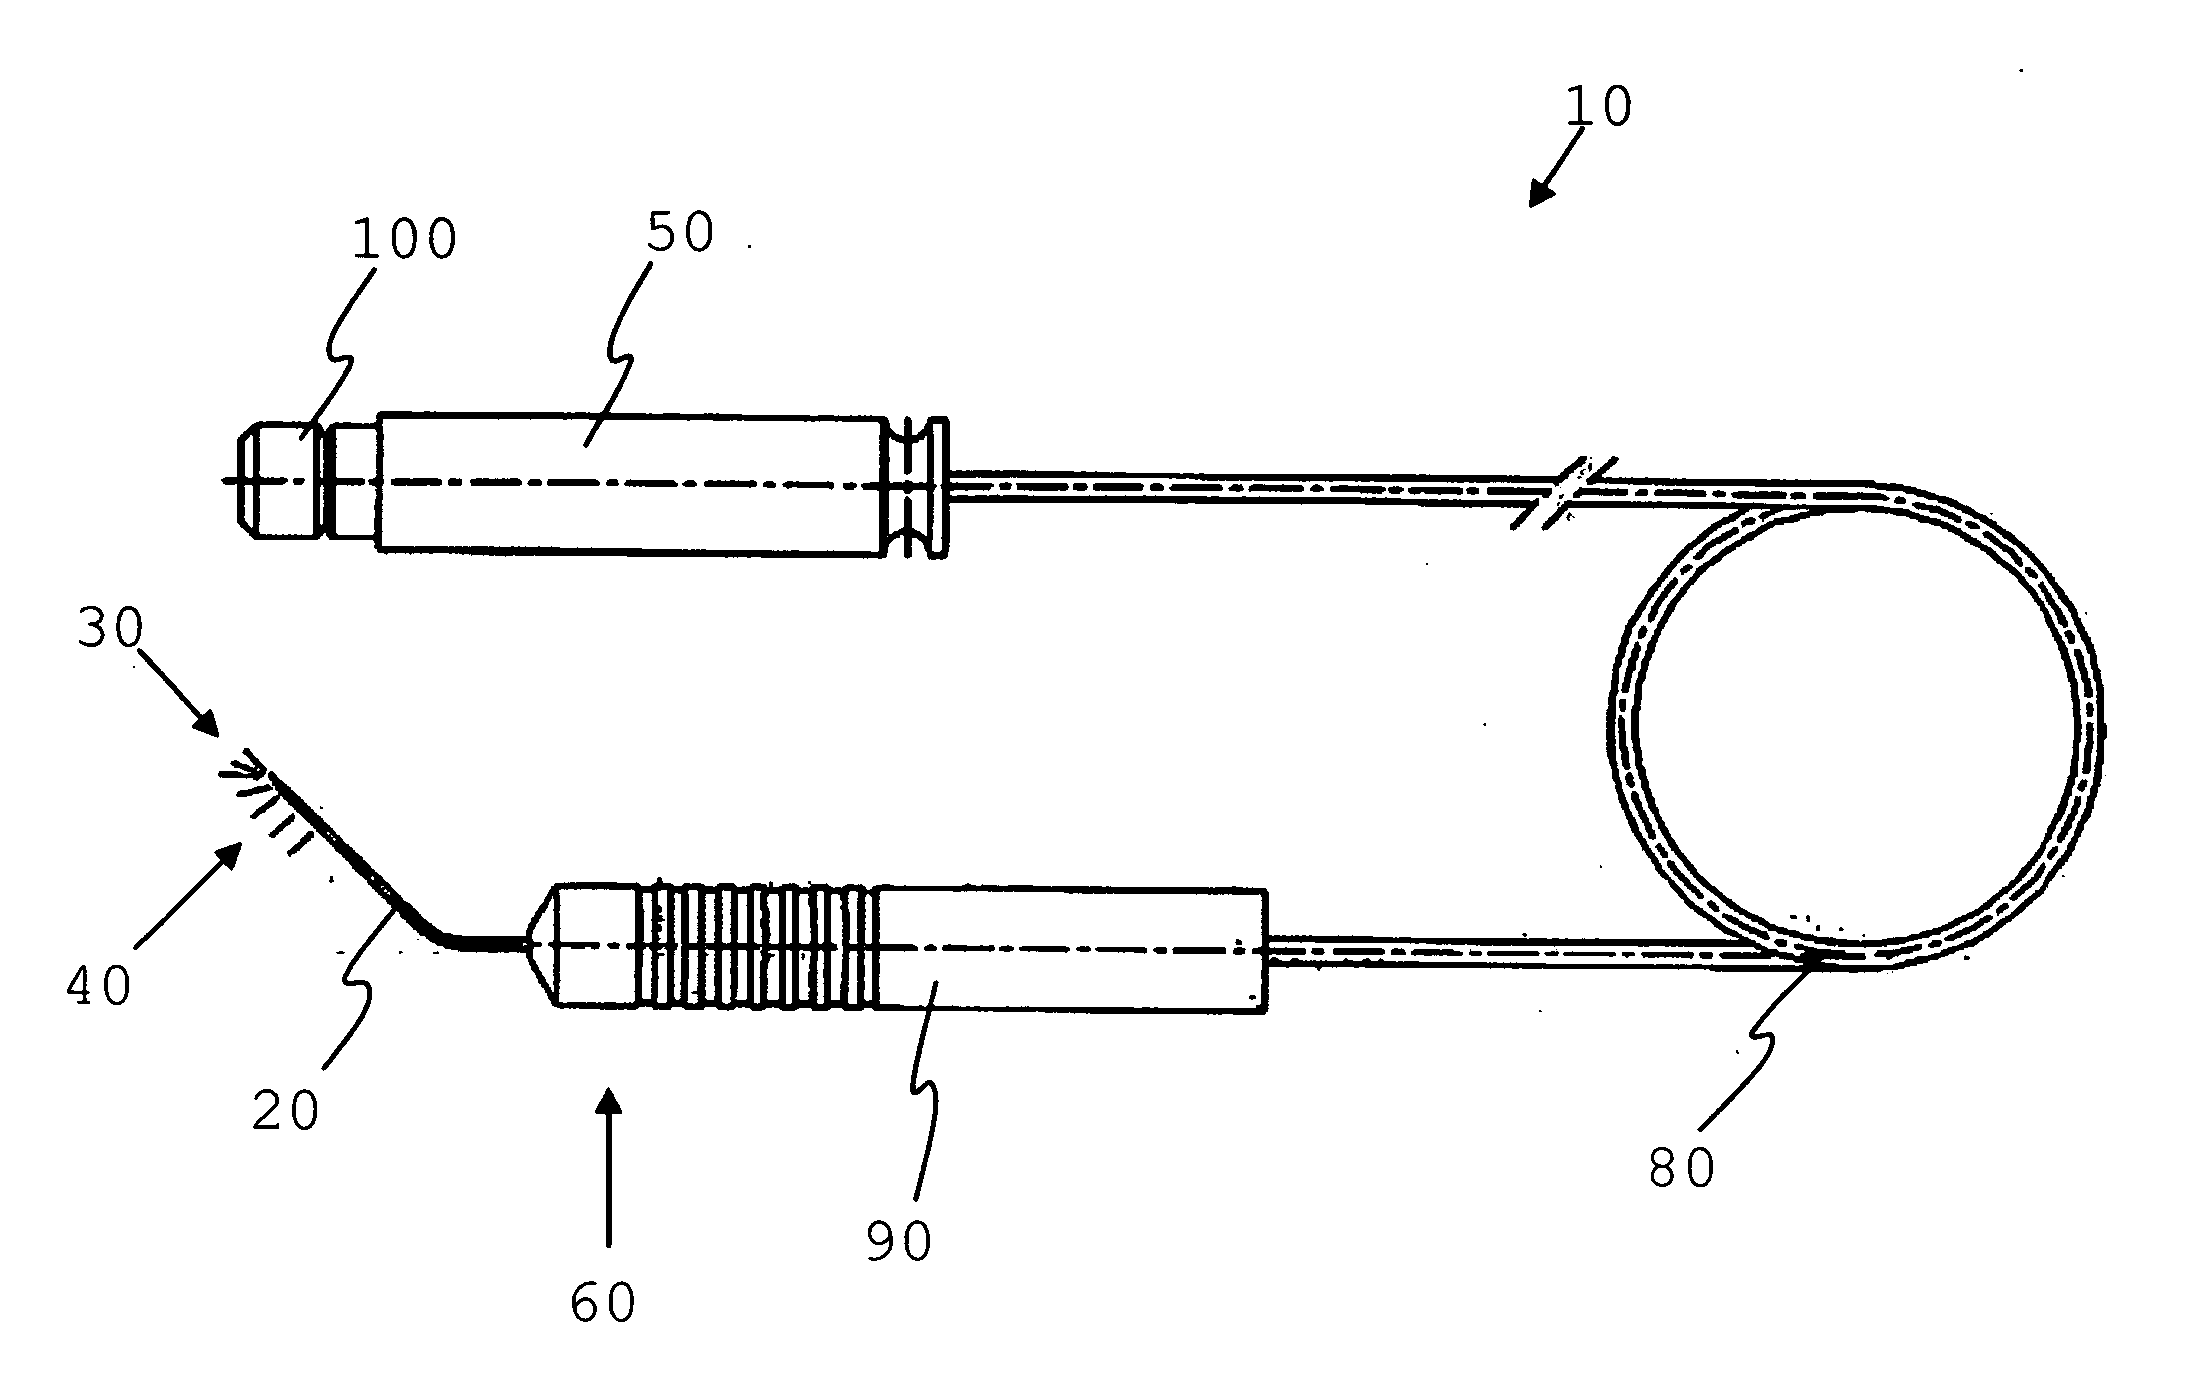 Shielded intraocular probe for improved illumination or therapeutic application of light